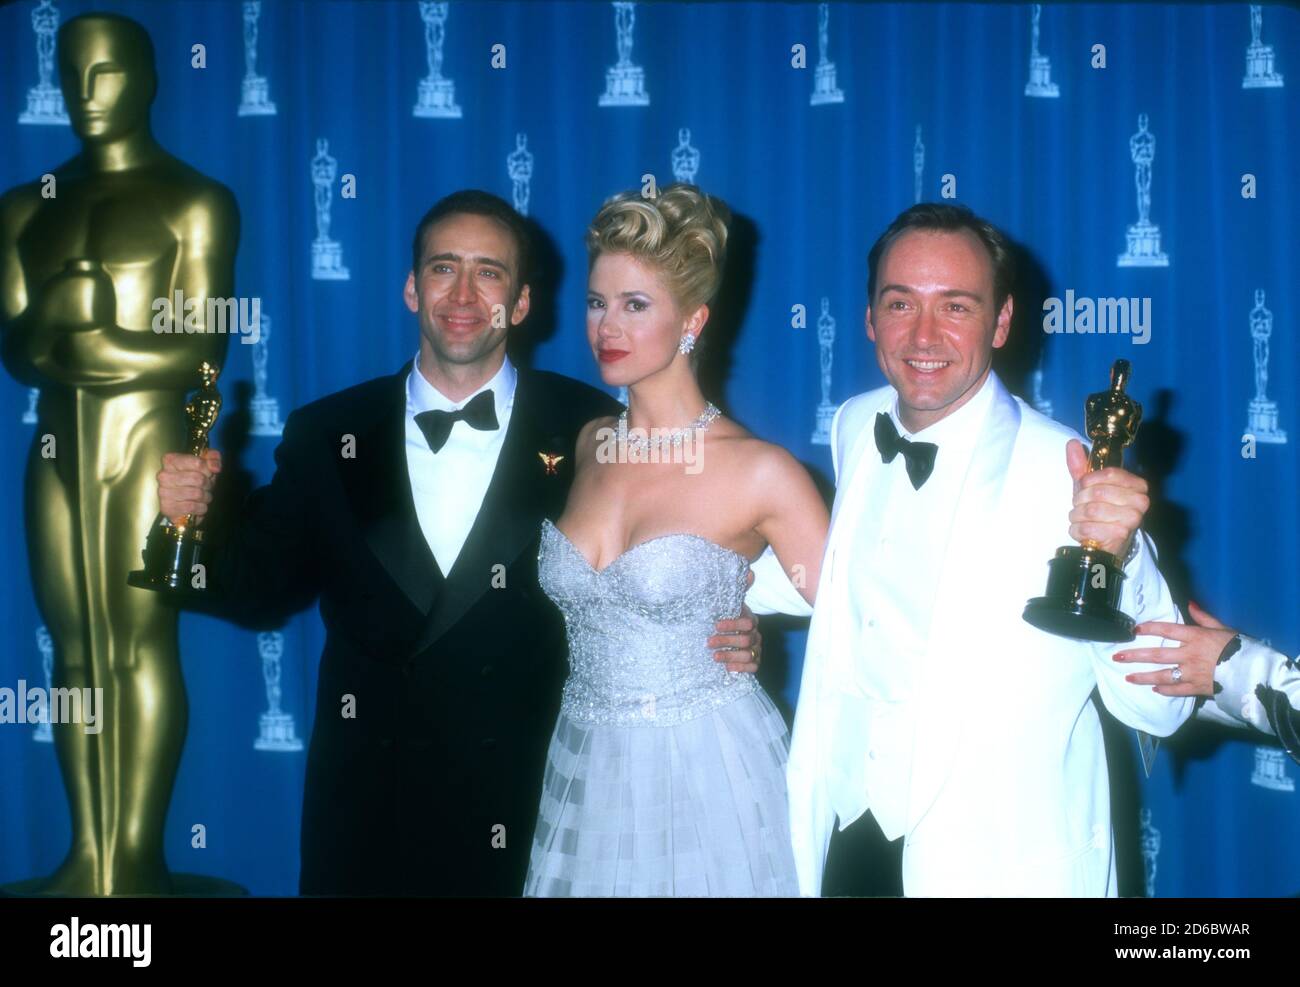 Los Angeles, California, USA 25th March 1996 (L-R) Best Actor Winner Nicolas Cage ('Leaving Las Vegas'), Best Supporting Actress Winner Mira Sorvino ('Mighty Aphrodite'), Best Supporting Actor Winner Kevin Spacey ('The Usual Suspects') pose with their Oscars in press room at the 68th Annual Academy Awards at Dorothy Chandler Pavilioin on March 25, 1996 in Los Angeles, California, USA. Photo by Barry King/Alamy Stock Photo Stock Photo